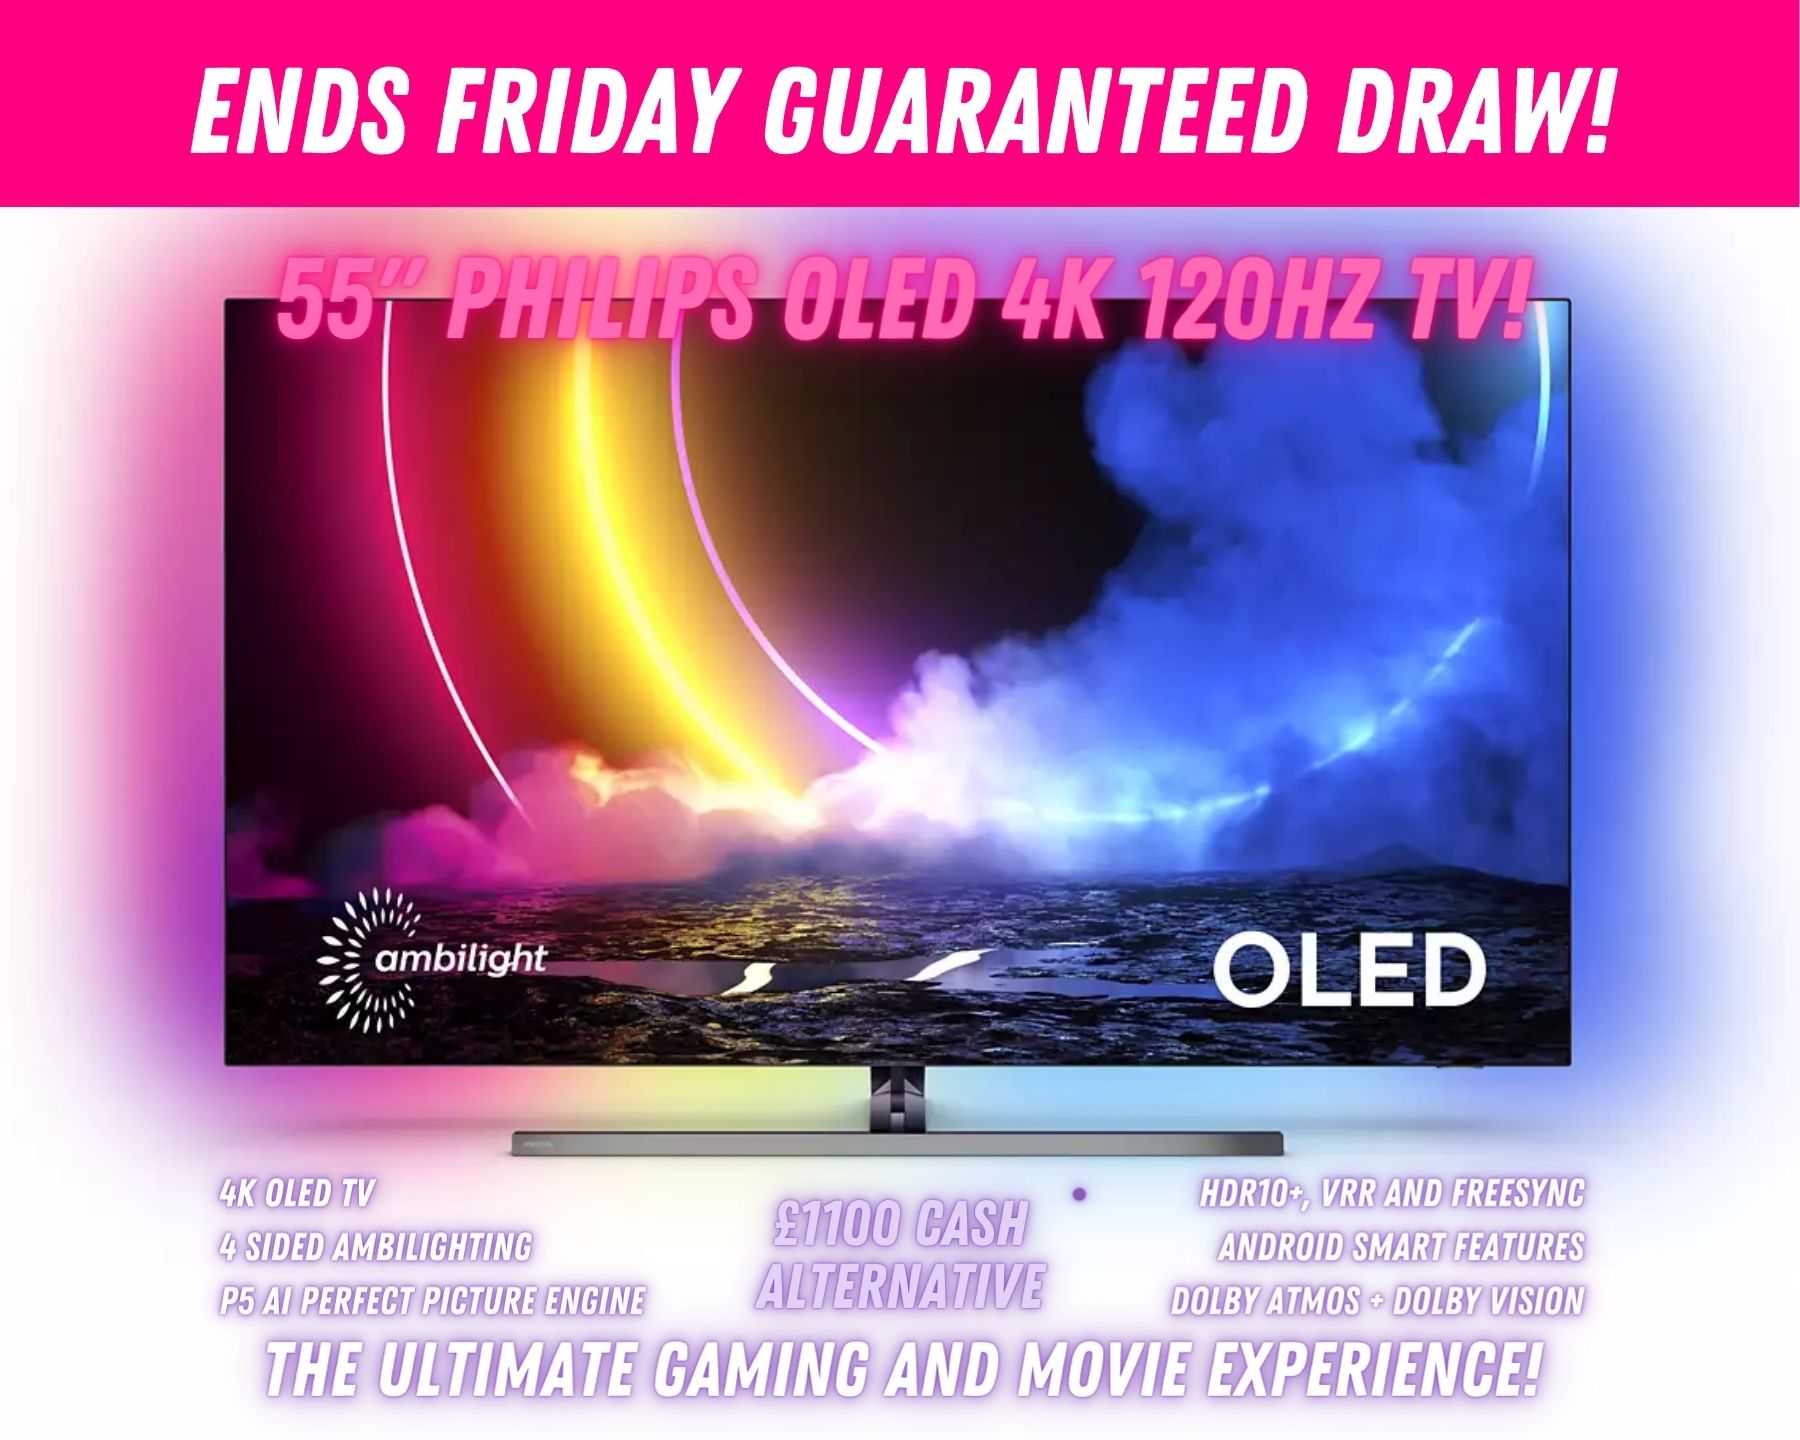 Win this 55" PHILIPS 4K 120HZ OLED TV - 4 SIDE AMBILIGHTING & HDMI 2.1!